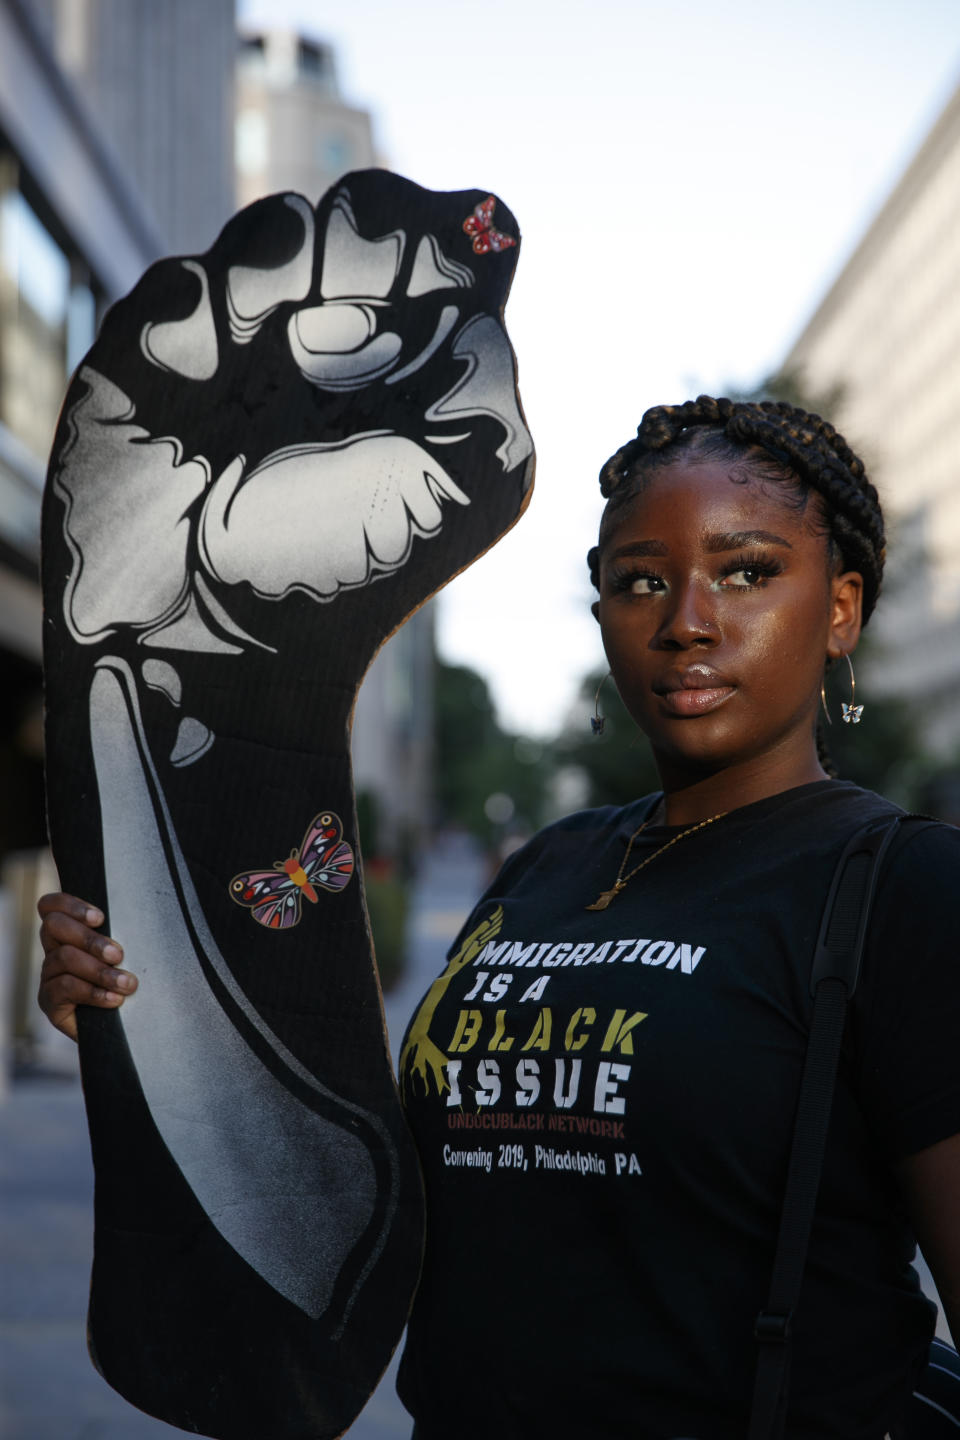 Joella Roberts, 22, of Washington, who is a recipient of the Deferred Action for Childhood Arrivals (DACA) program and is originally from Trinidad and Tobago, poses for a portrait, Friday, June 12, 2020, before leading a protest near the White House in Washington, over the death of George Floyd, a black man who died while in police custody in Minneapolis. Roberts, who founded her own non-profit called Migration Matters, spoke to people visiting the site of protests about immigration and racism. (AP Photo/Jacquelyn Martin)